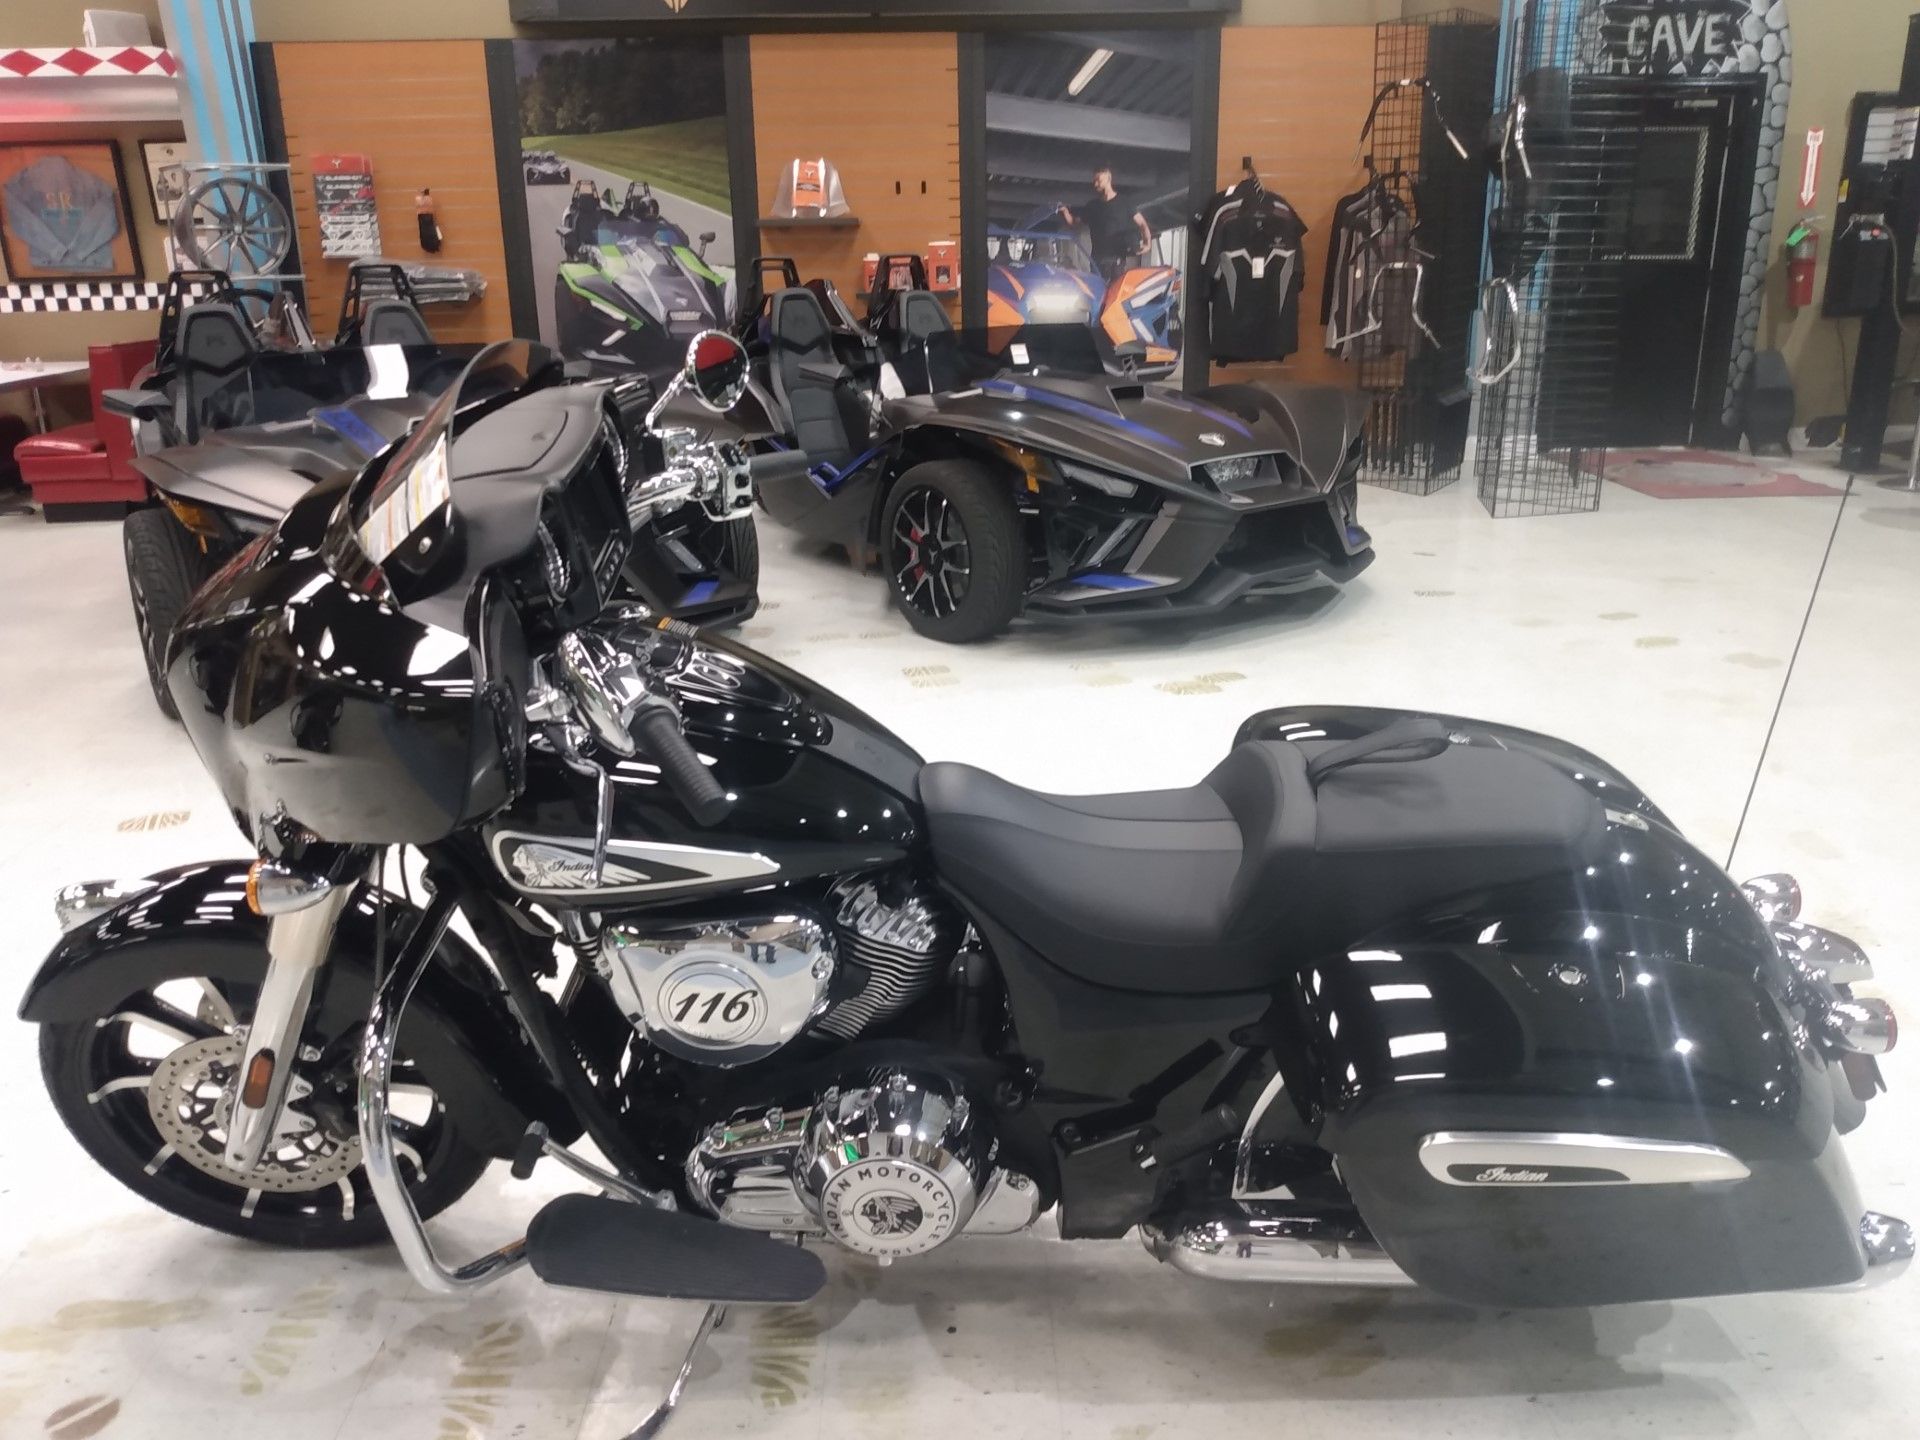 2022 Indian Motorcycle Chieftain® Limited in Saint Rose, Louisiana - Photo 3